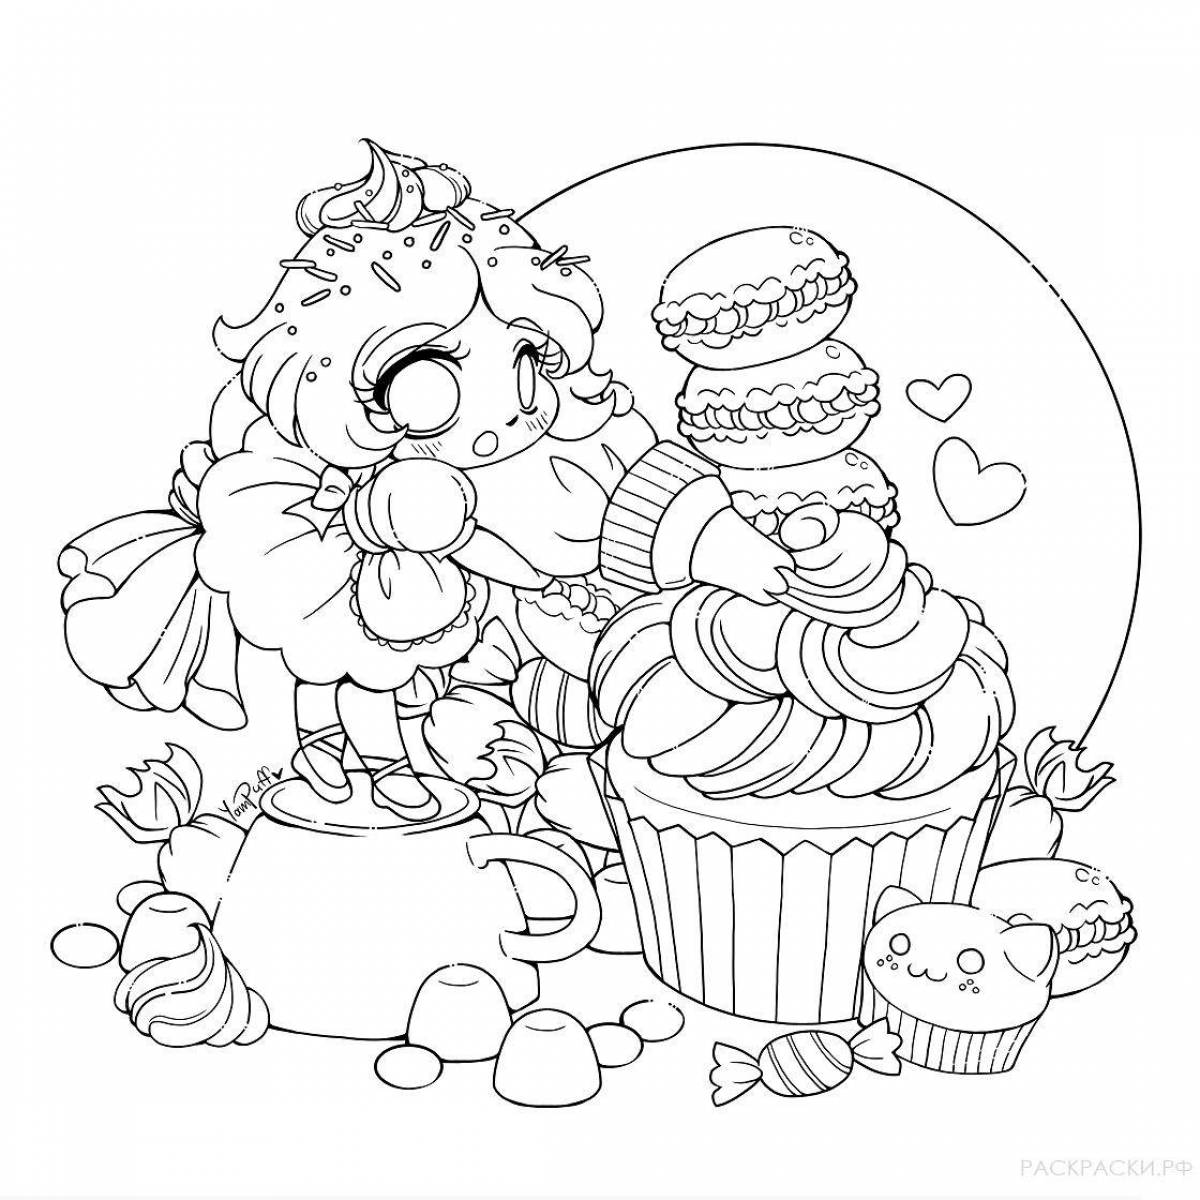 Outstanding sweets coloring for girls